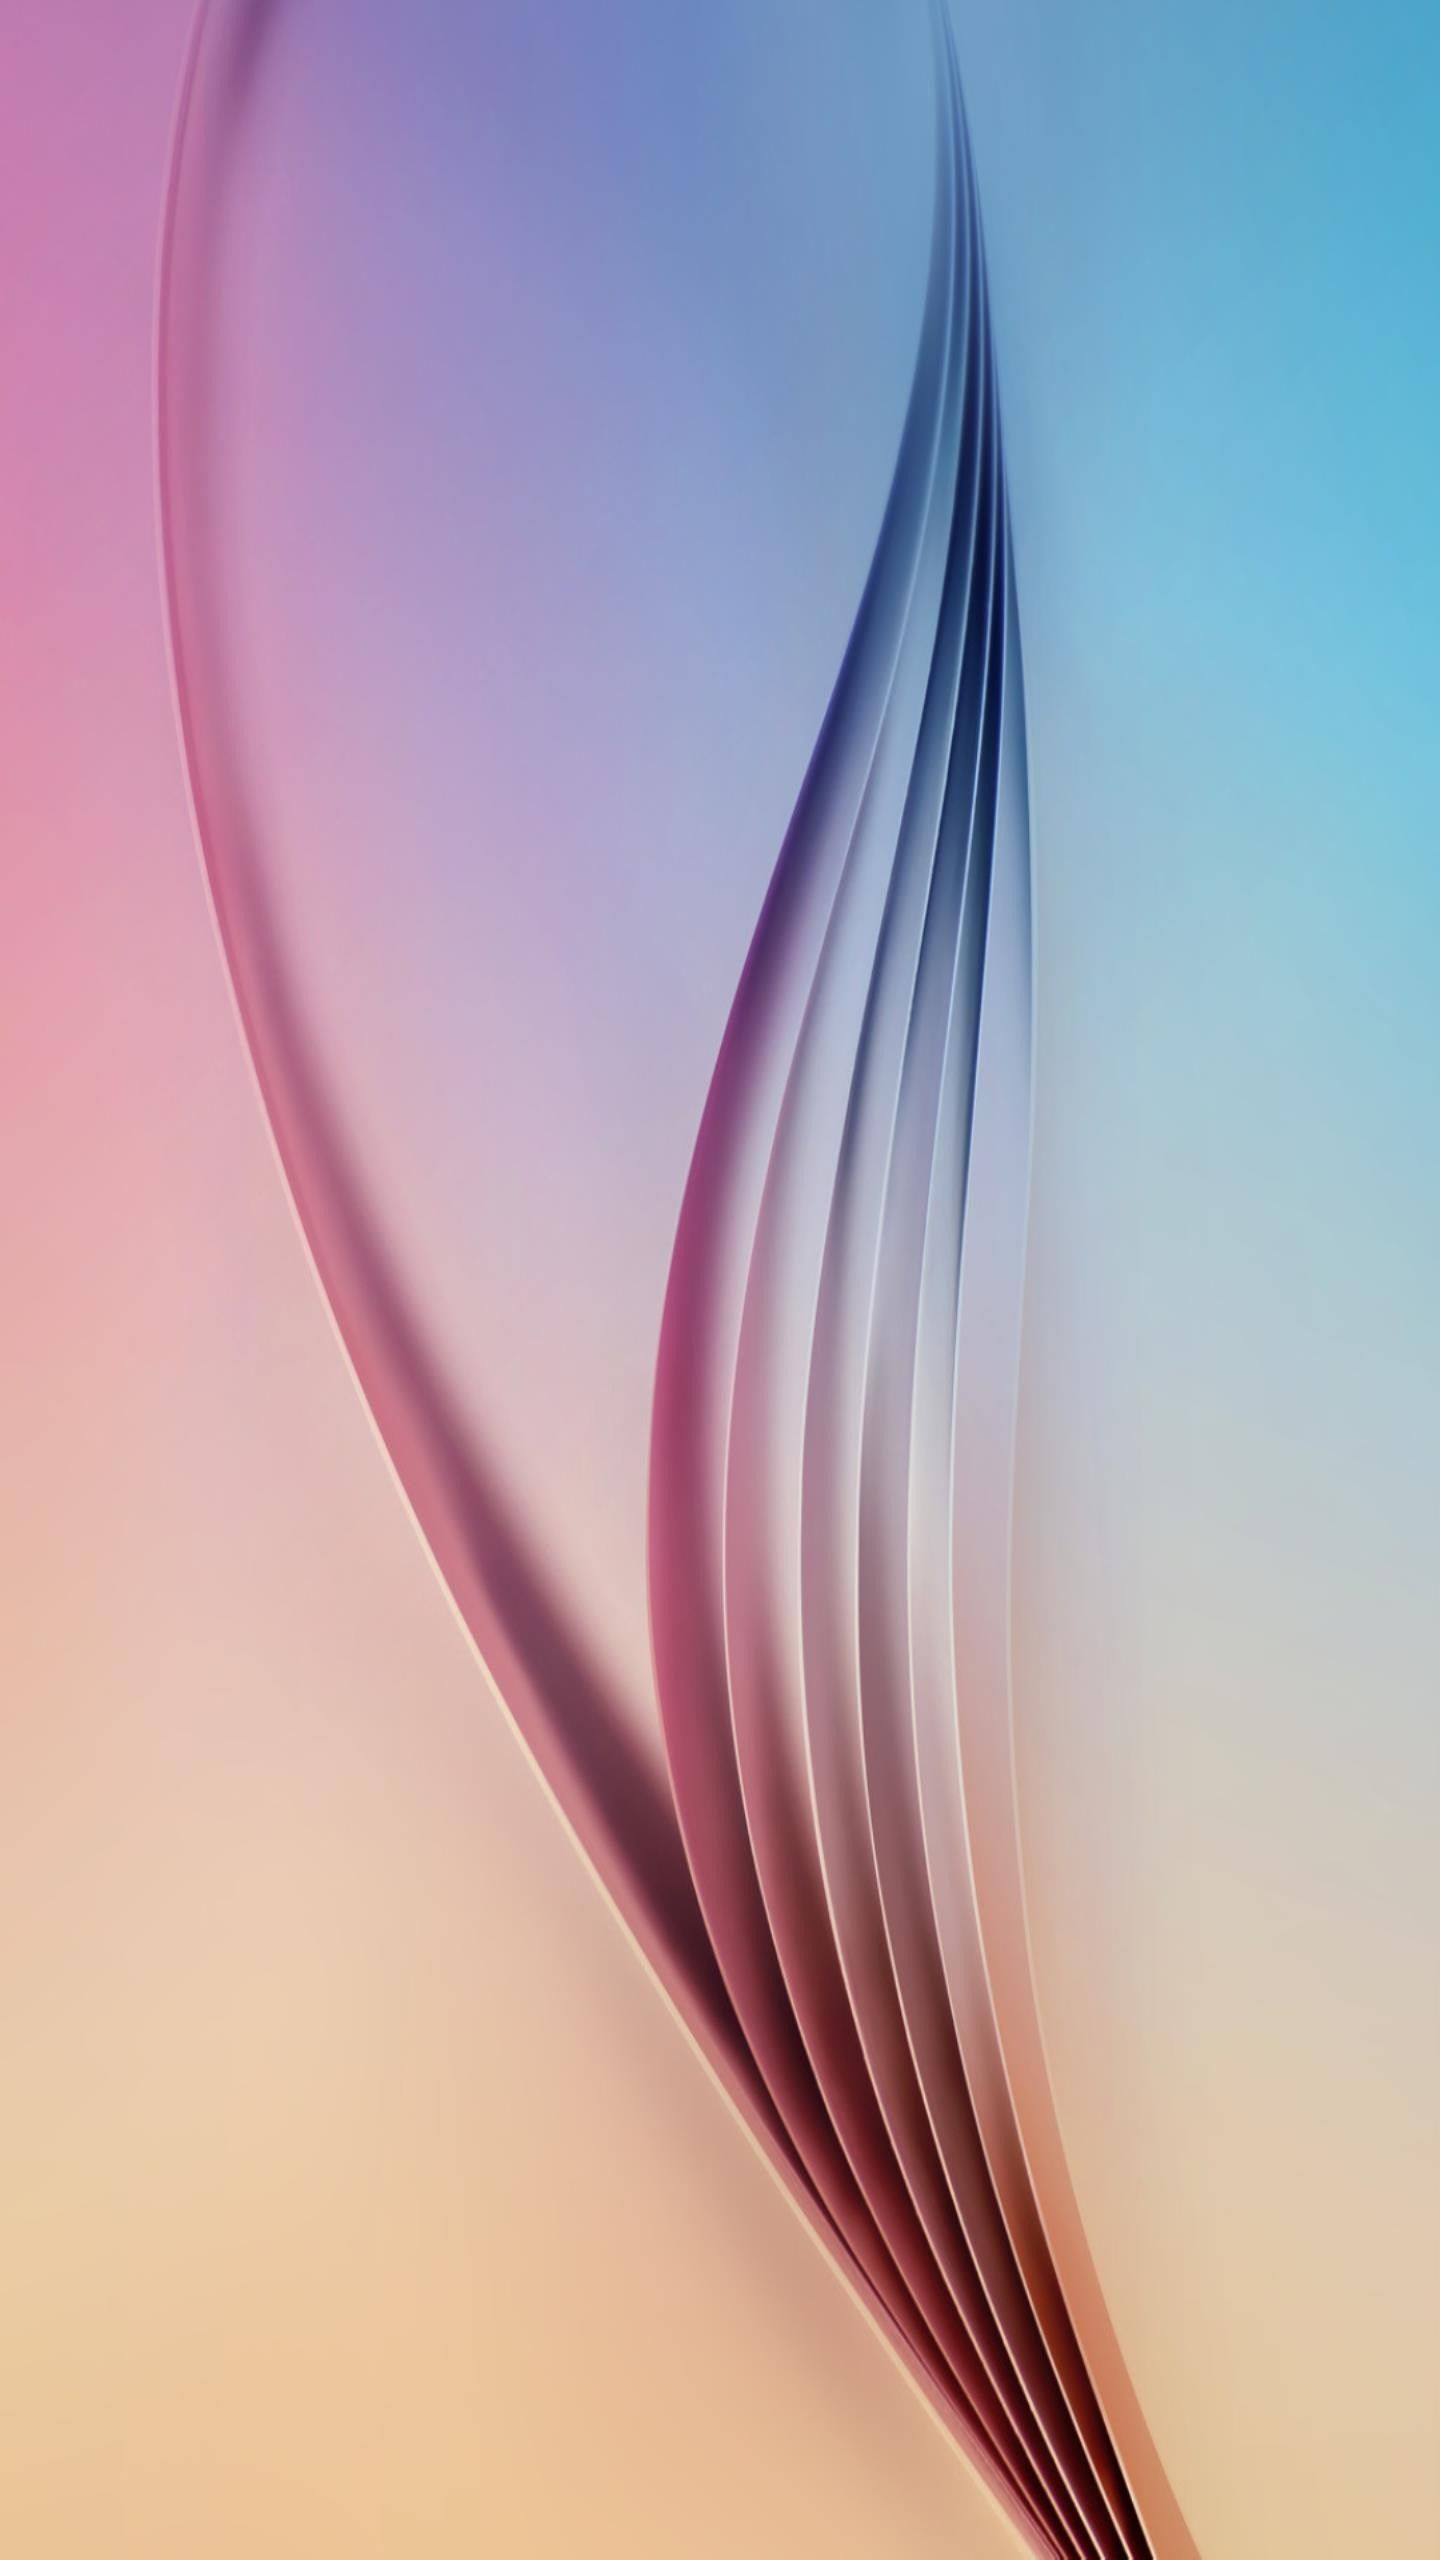 1440x2560 Samsung Galaxy S6 Wallpapers Top Free Samsung Galaxy S6 Backgrounds